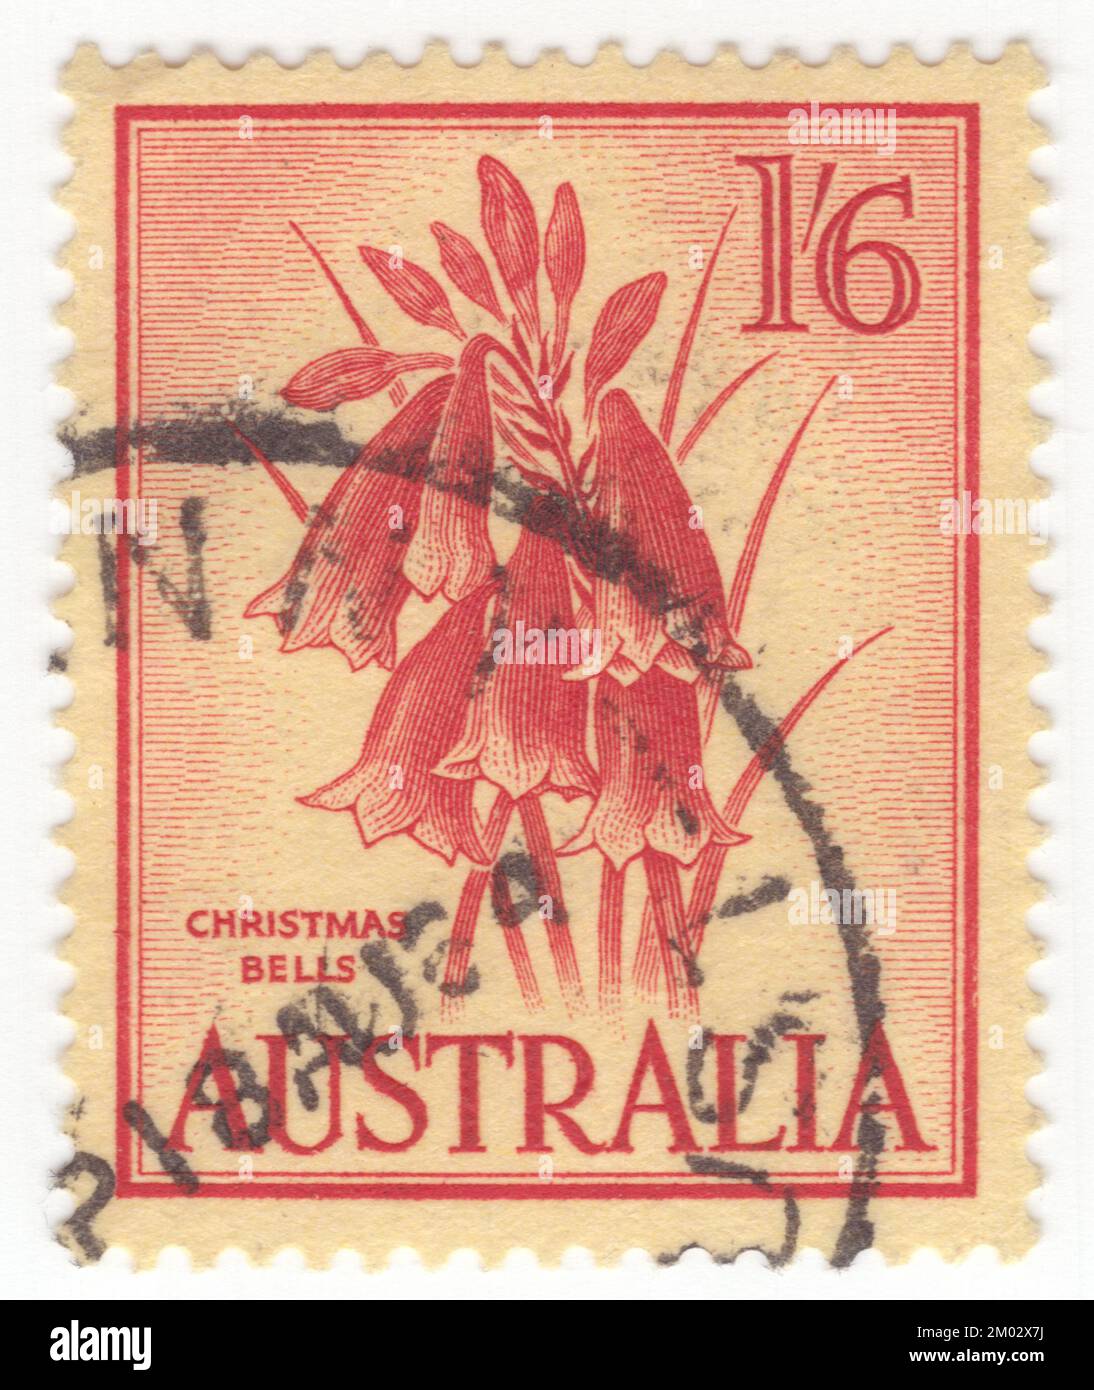 AUSTRALIA — 1960 February 3: An 1 shilling 6 pence red on yellow postage stamp depicting Christmas bells. Actinotus helianthi, known as the flannel flower, is a common species of flowering plant native to the bushland around Sydney. It was named and first described by the French botanist Jacques Labillardière in his Novae Hollandiae Plantarum Specimen the first general flora of Australia Stock Photo